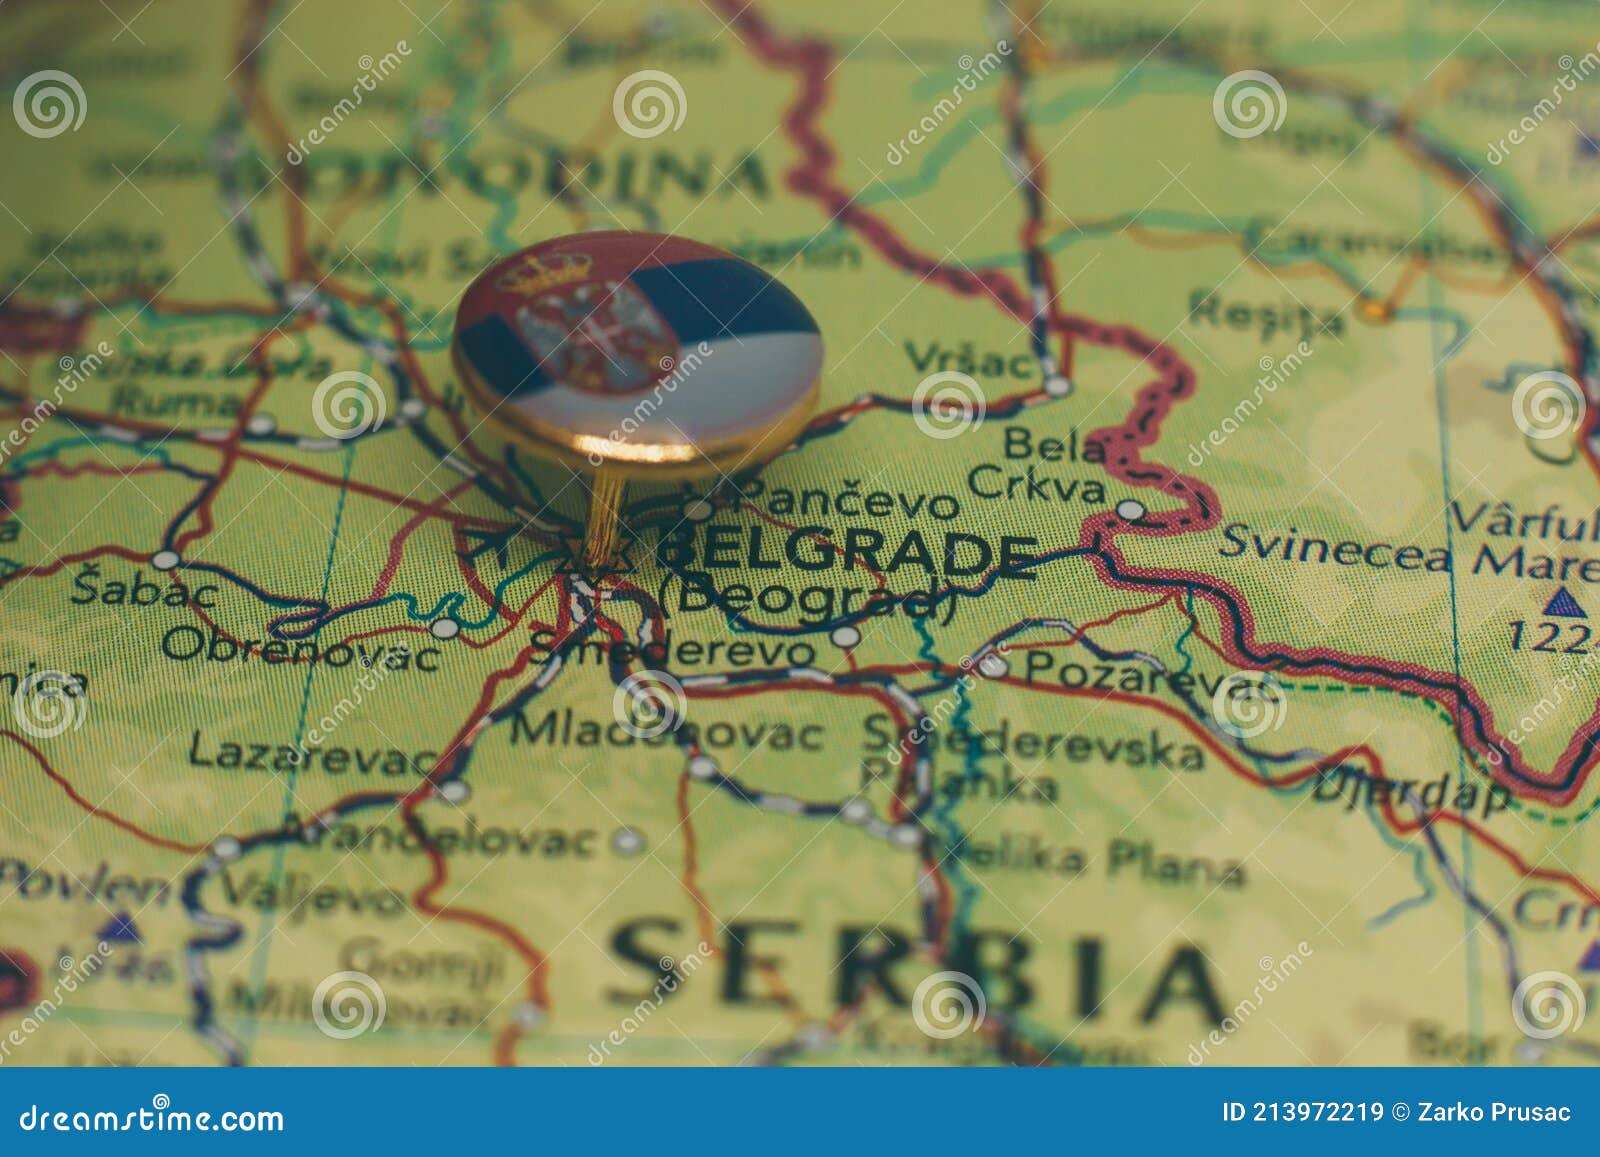 Belgrade Pinned On A Map With The Flag Of Serbia Stock Image Image Of